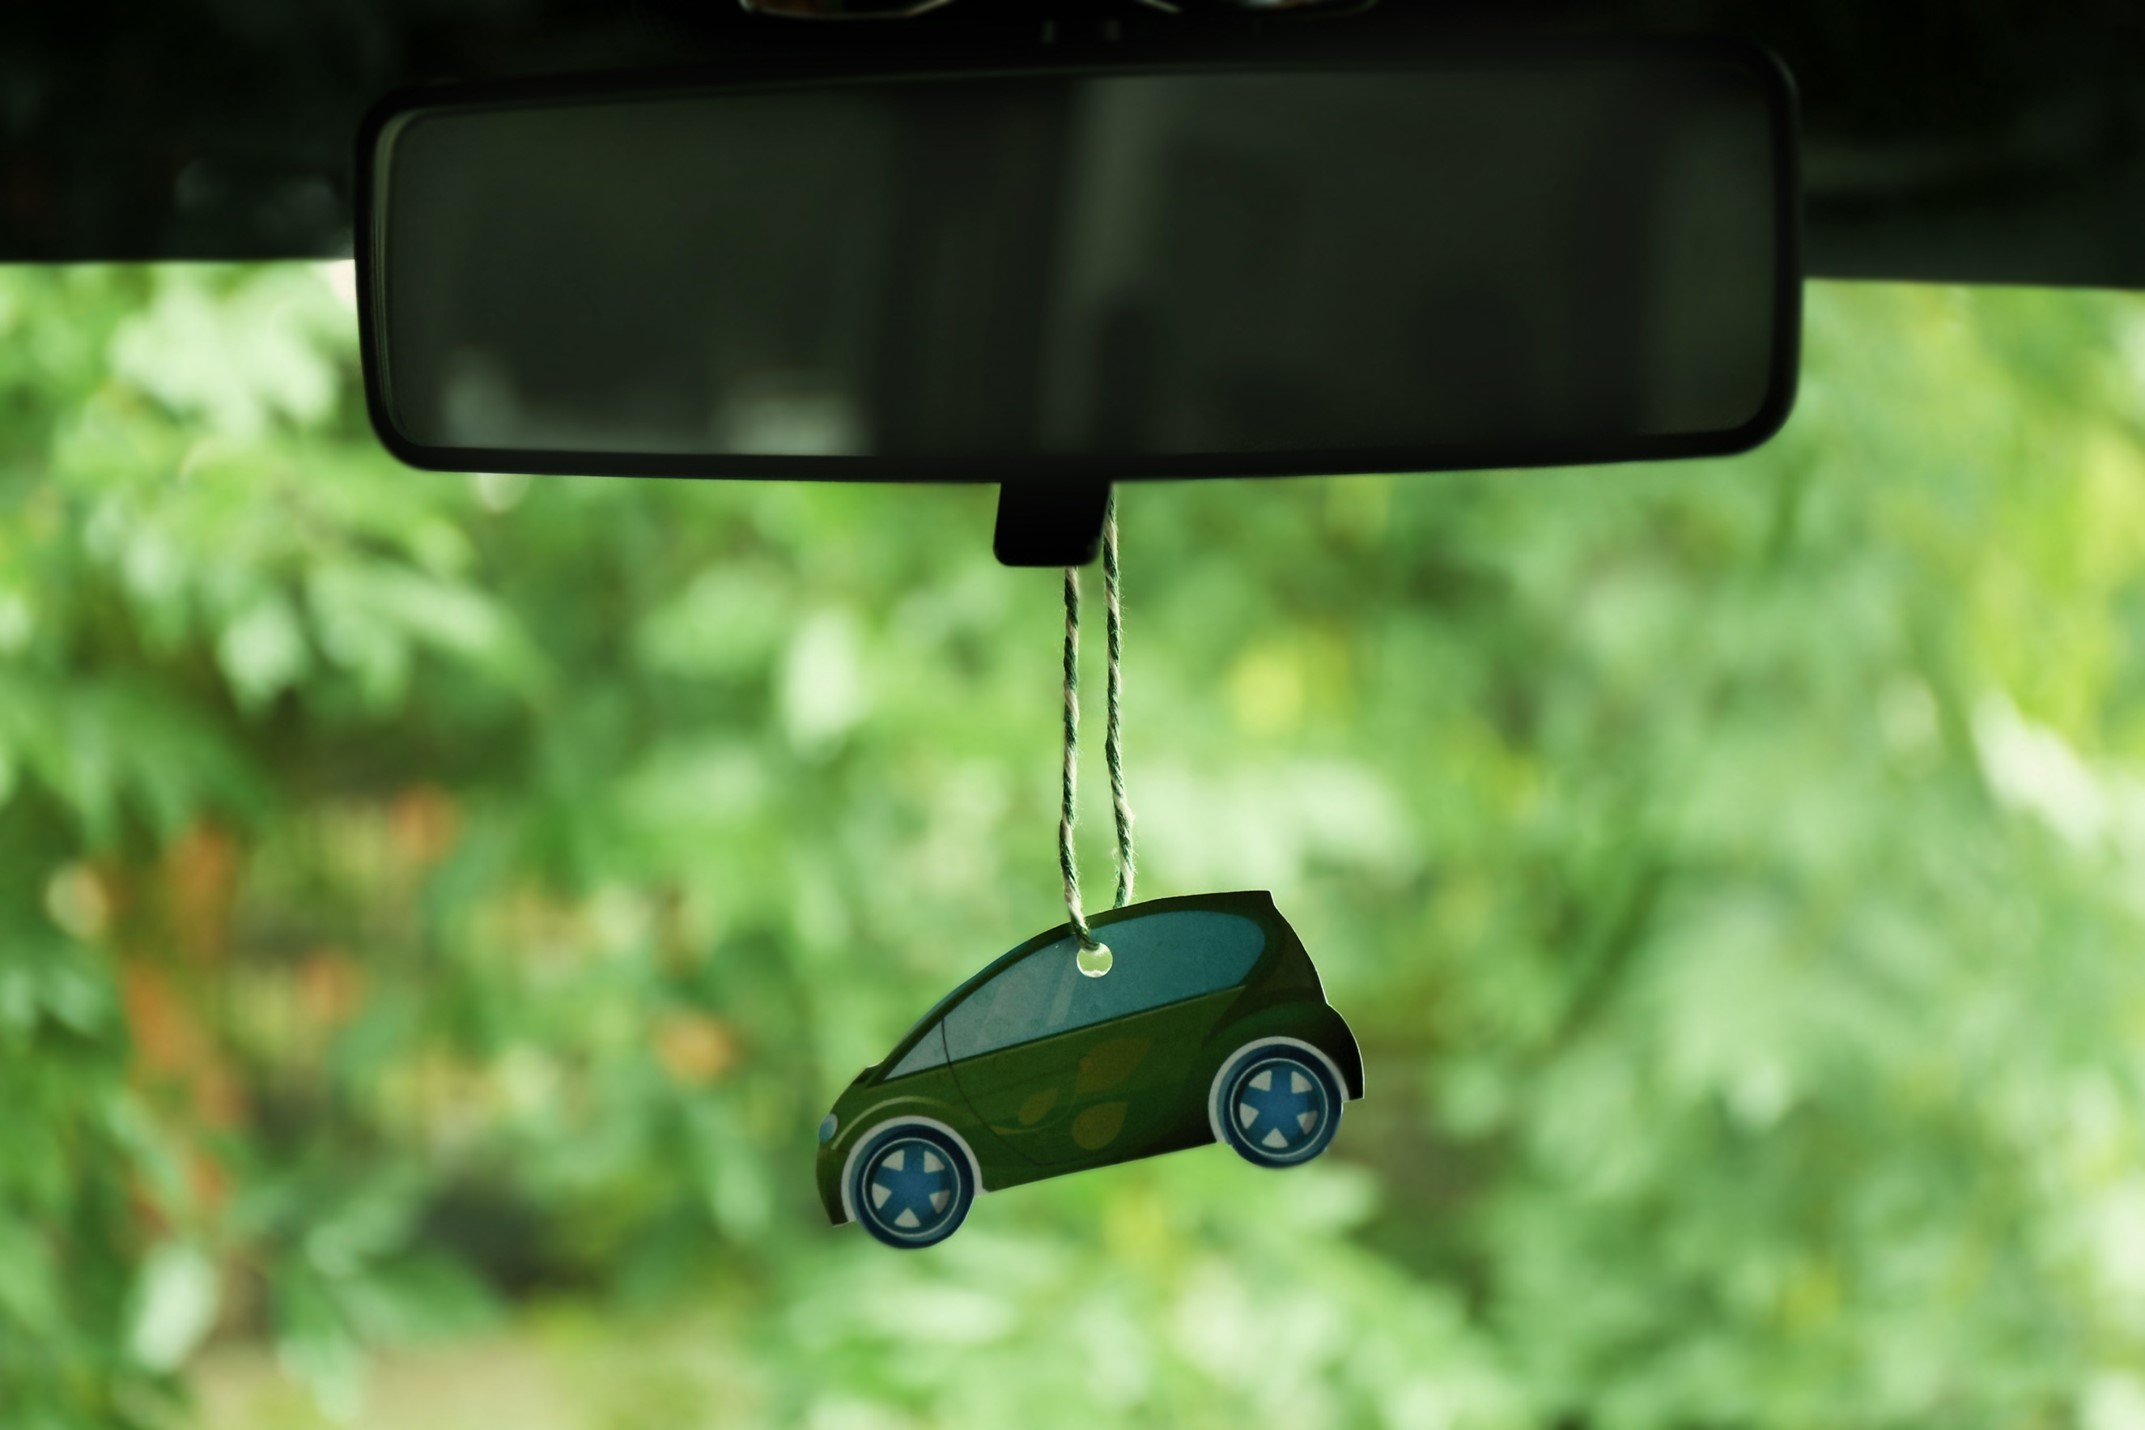 Air freshener shaped like SUV hanging from rear view mirror